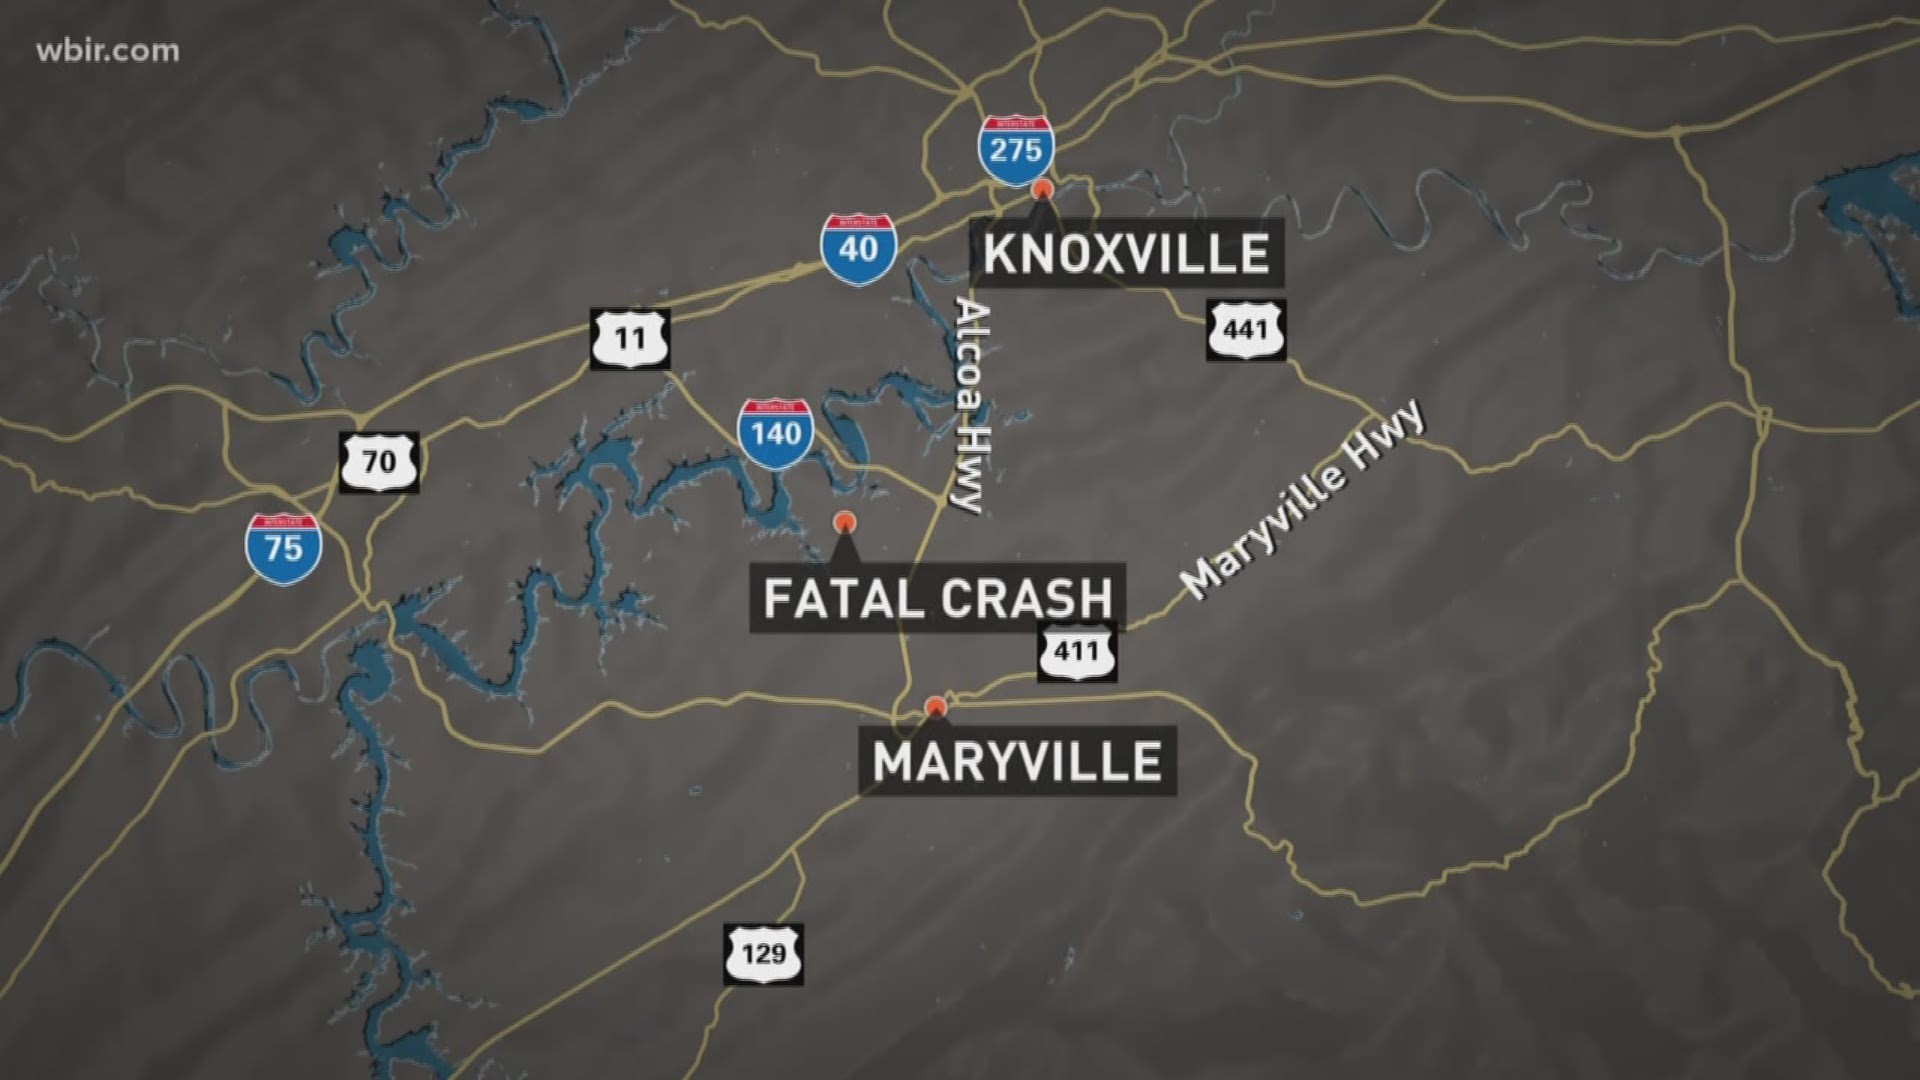 Tennessee Highway Patrol says one person died Friday night in a head-on collision in Louisville.